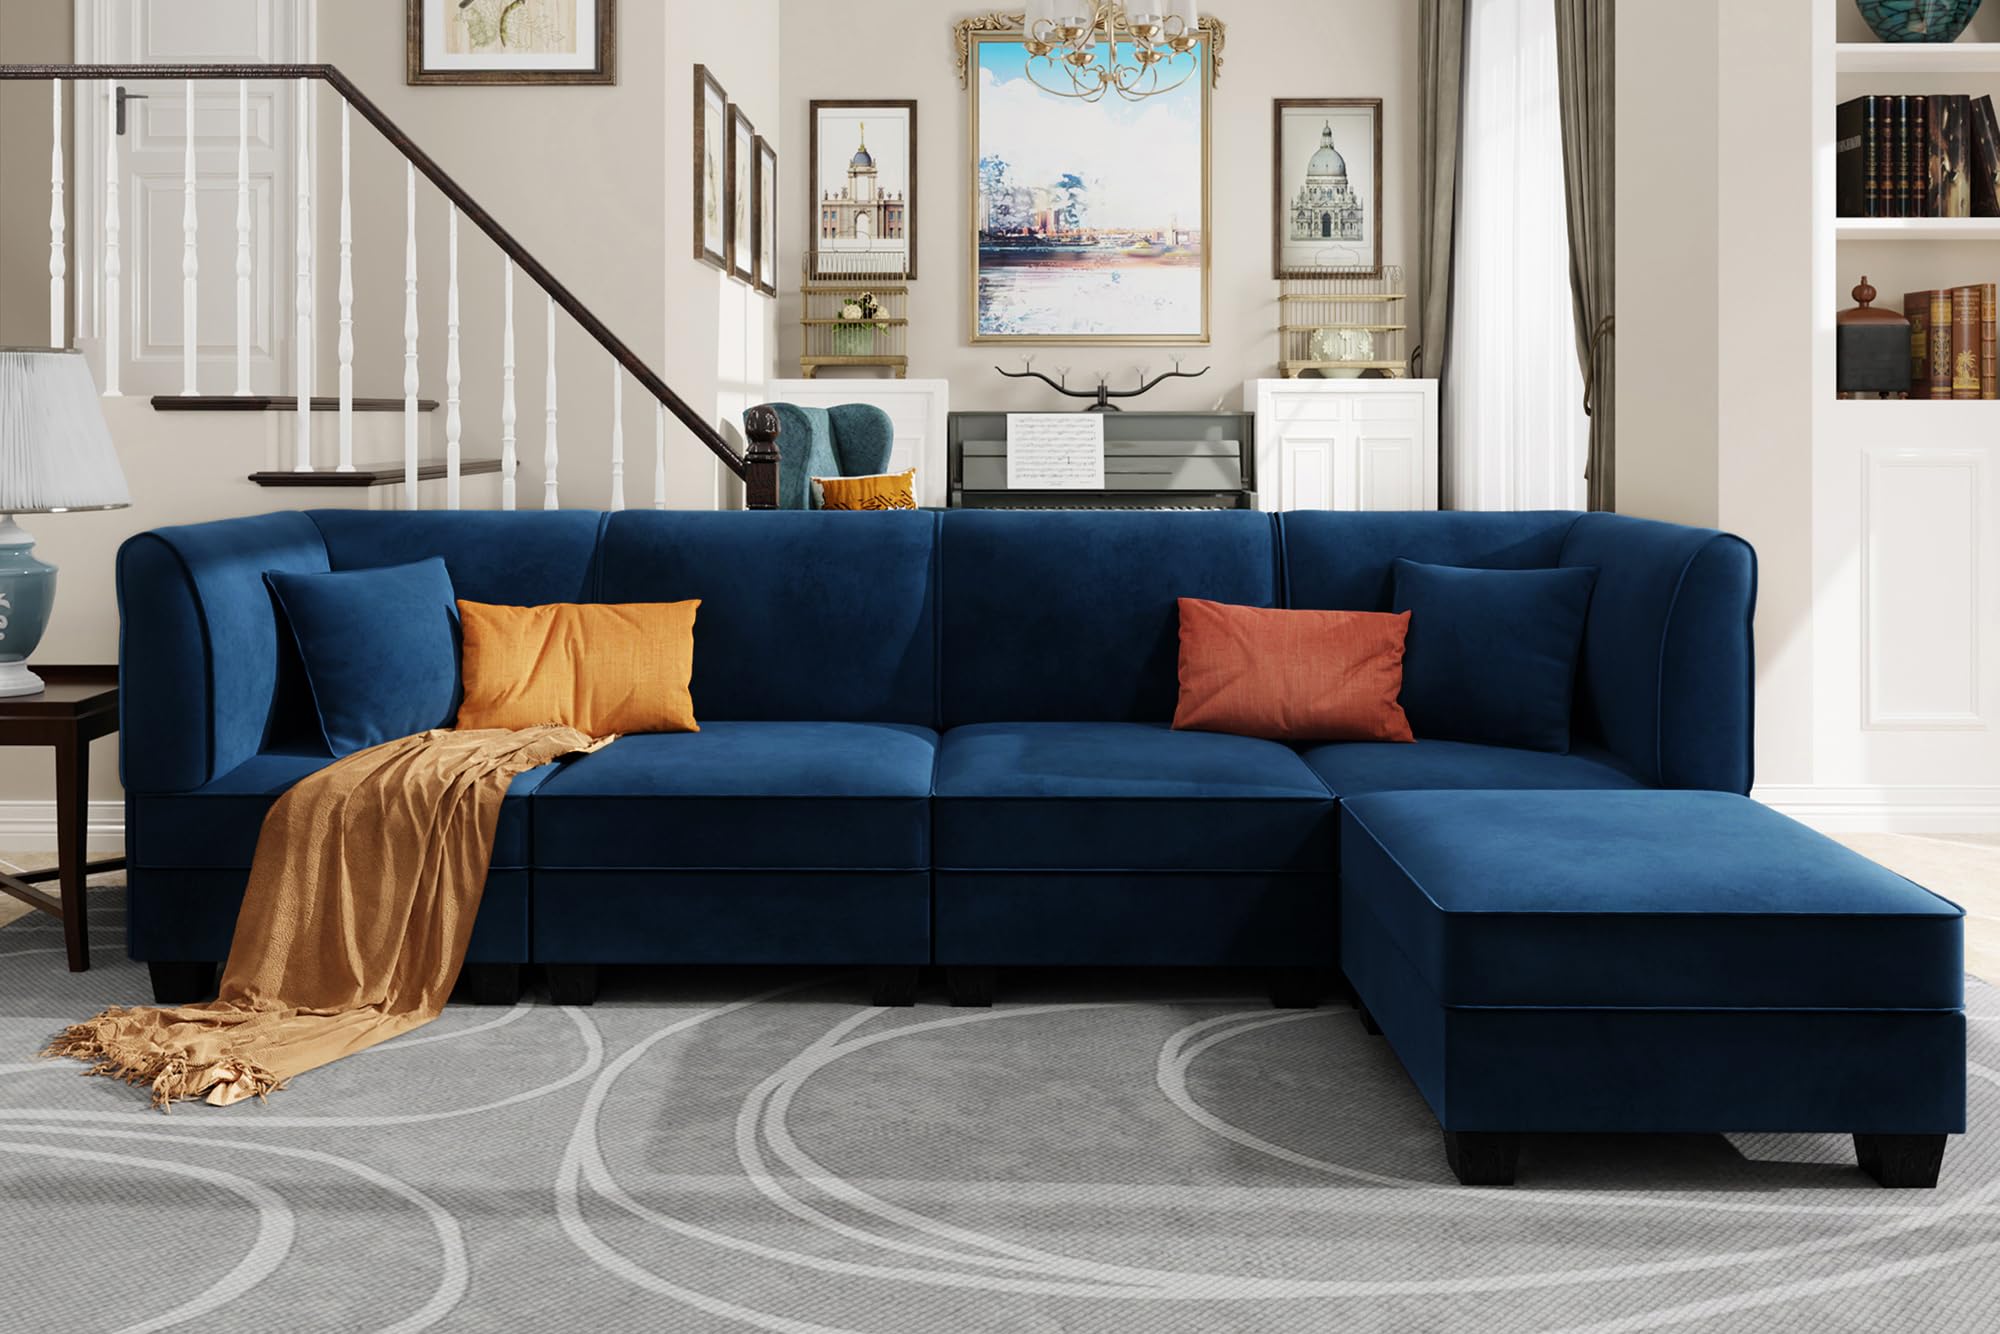 How To Choose A Sectional Sofa